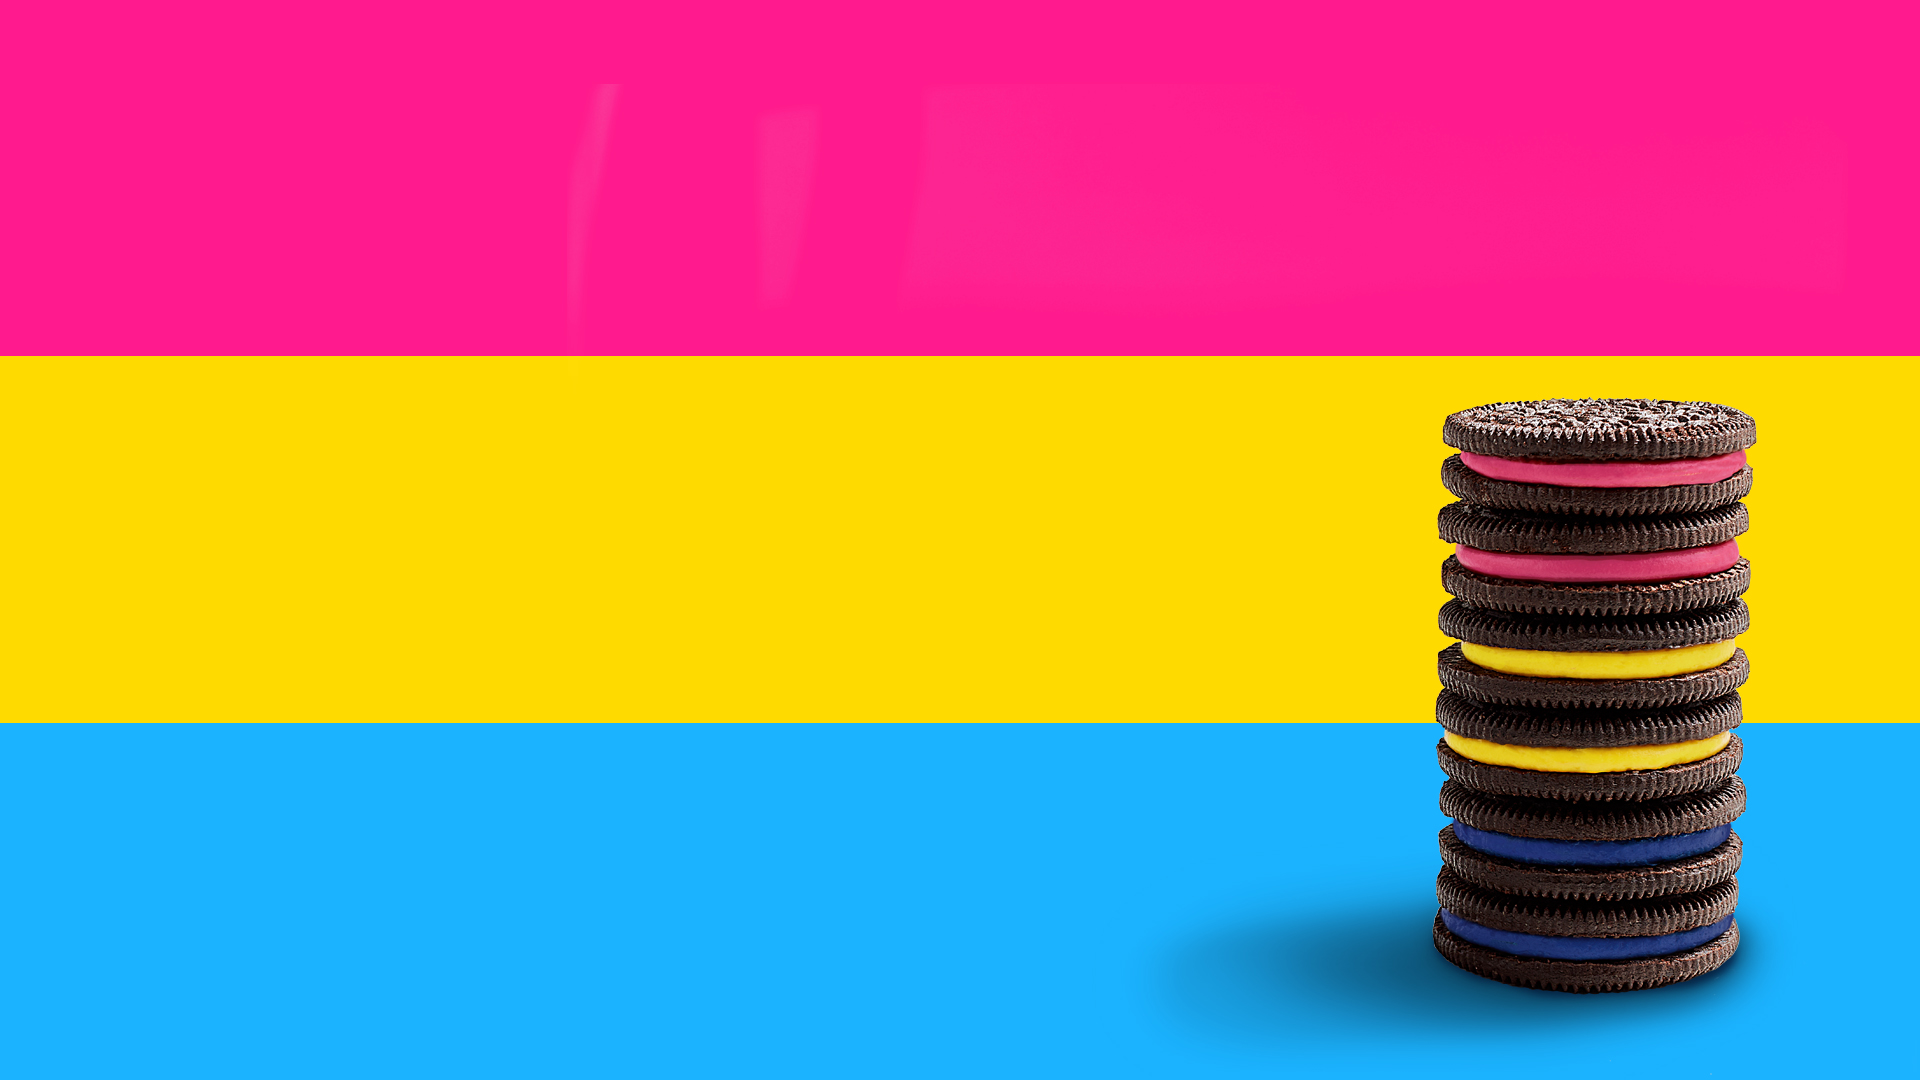 Oreo Cookie On Twitter The Pansexual Pride Flag Consists Of Three Horizontal Stripes One Pink One Yellow And One Light Blue